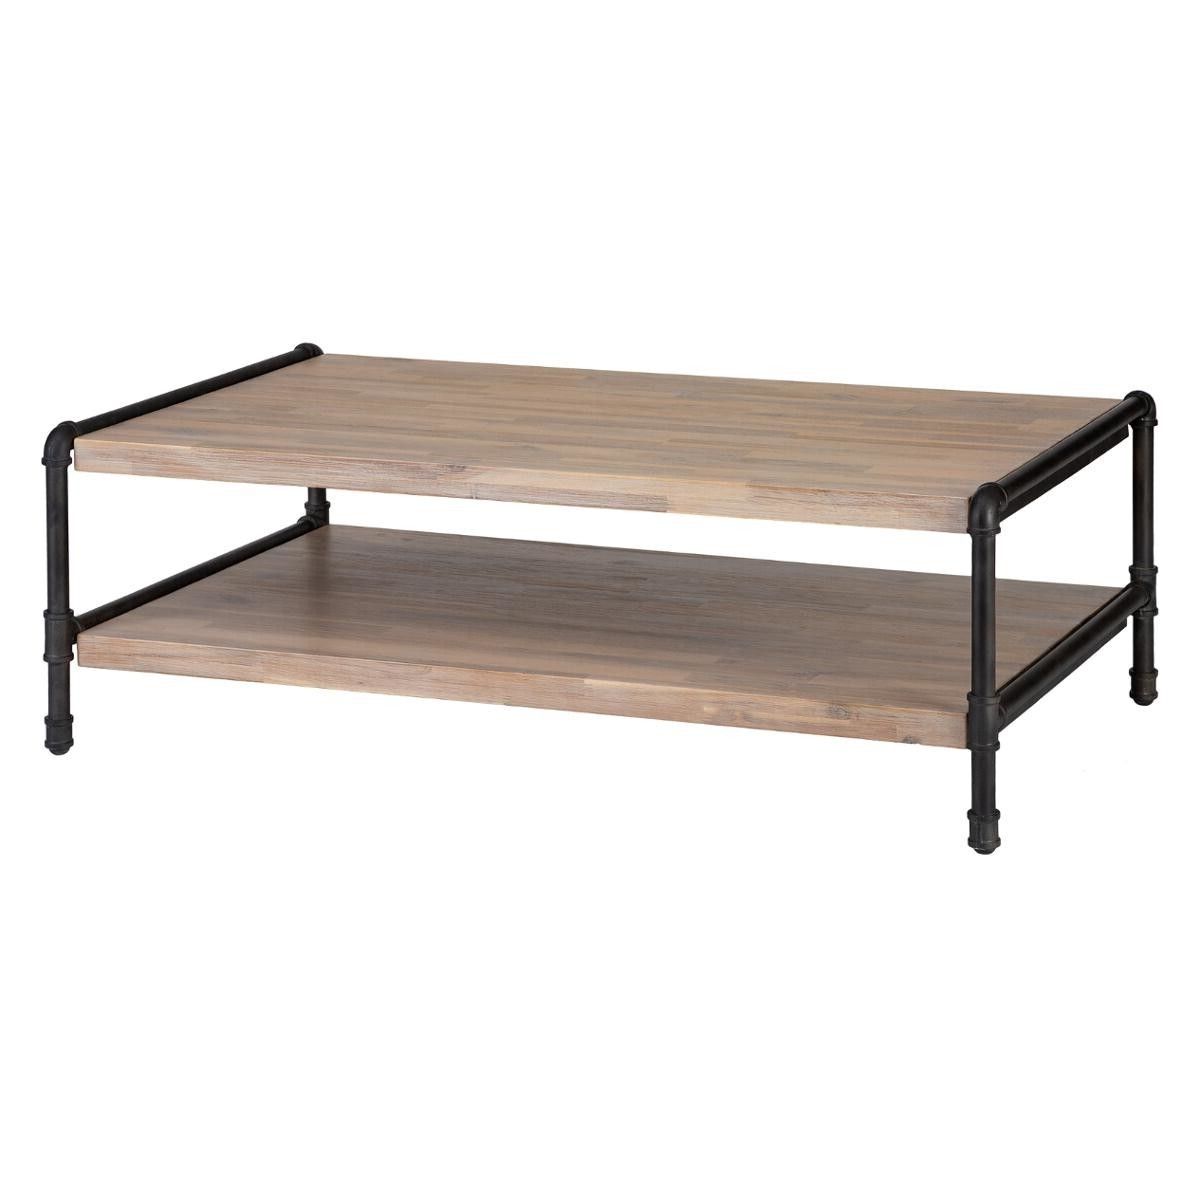 Favorite Acacia Wood Coffee Tables Intended For Siam Coffee Table, Iron & Acacia Wood – Atmosphera, Cr (View 8 of 20)